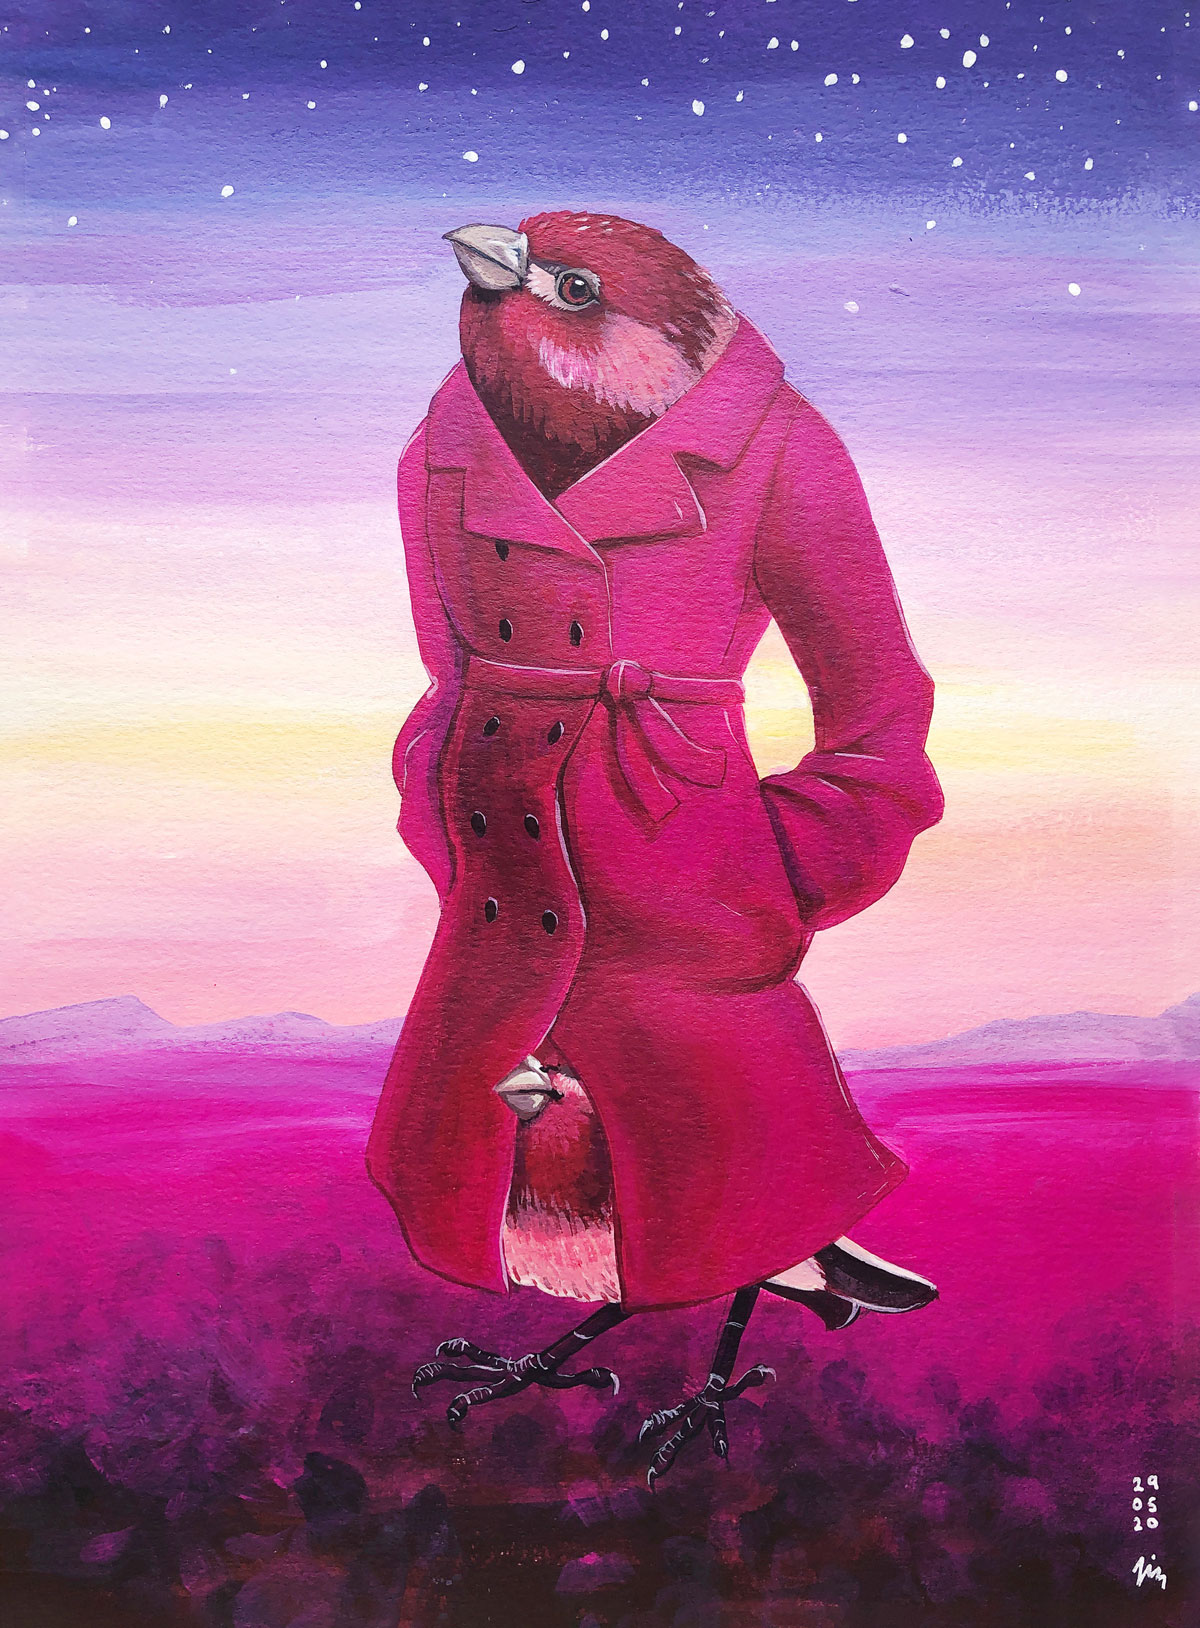 Three Birds in a Trench Coat, a surreal acrylic painting by Liz Broekhuyse